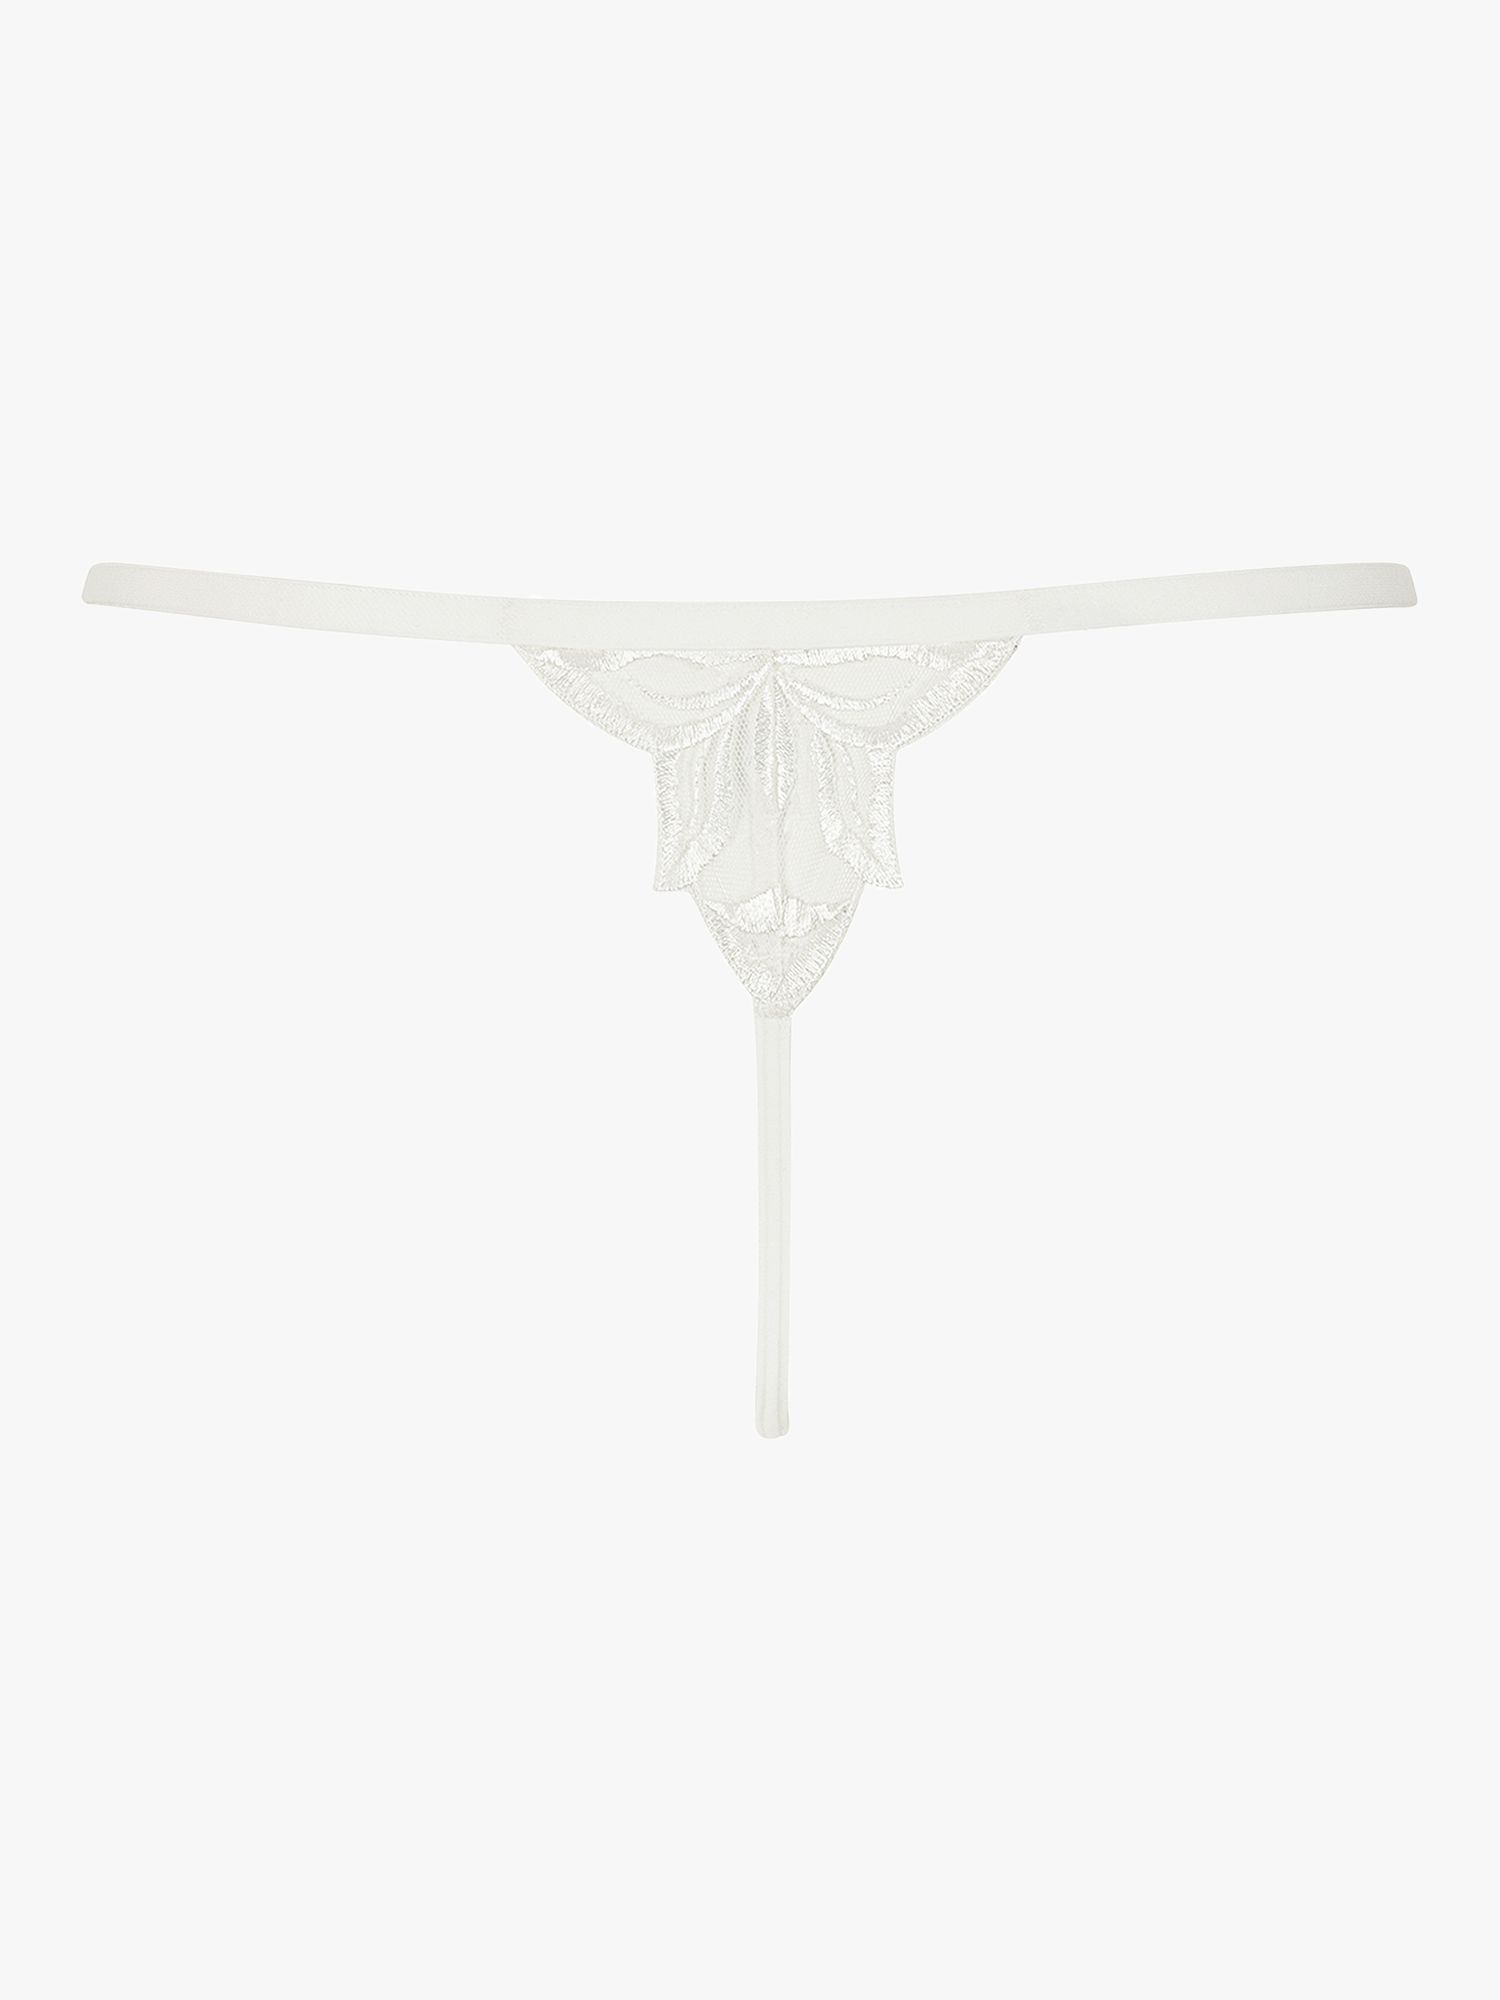 Bluebella Isadora Leaf Embroidery Thong, White, 8